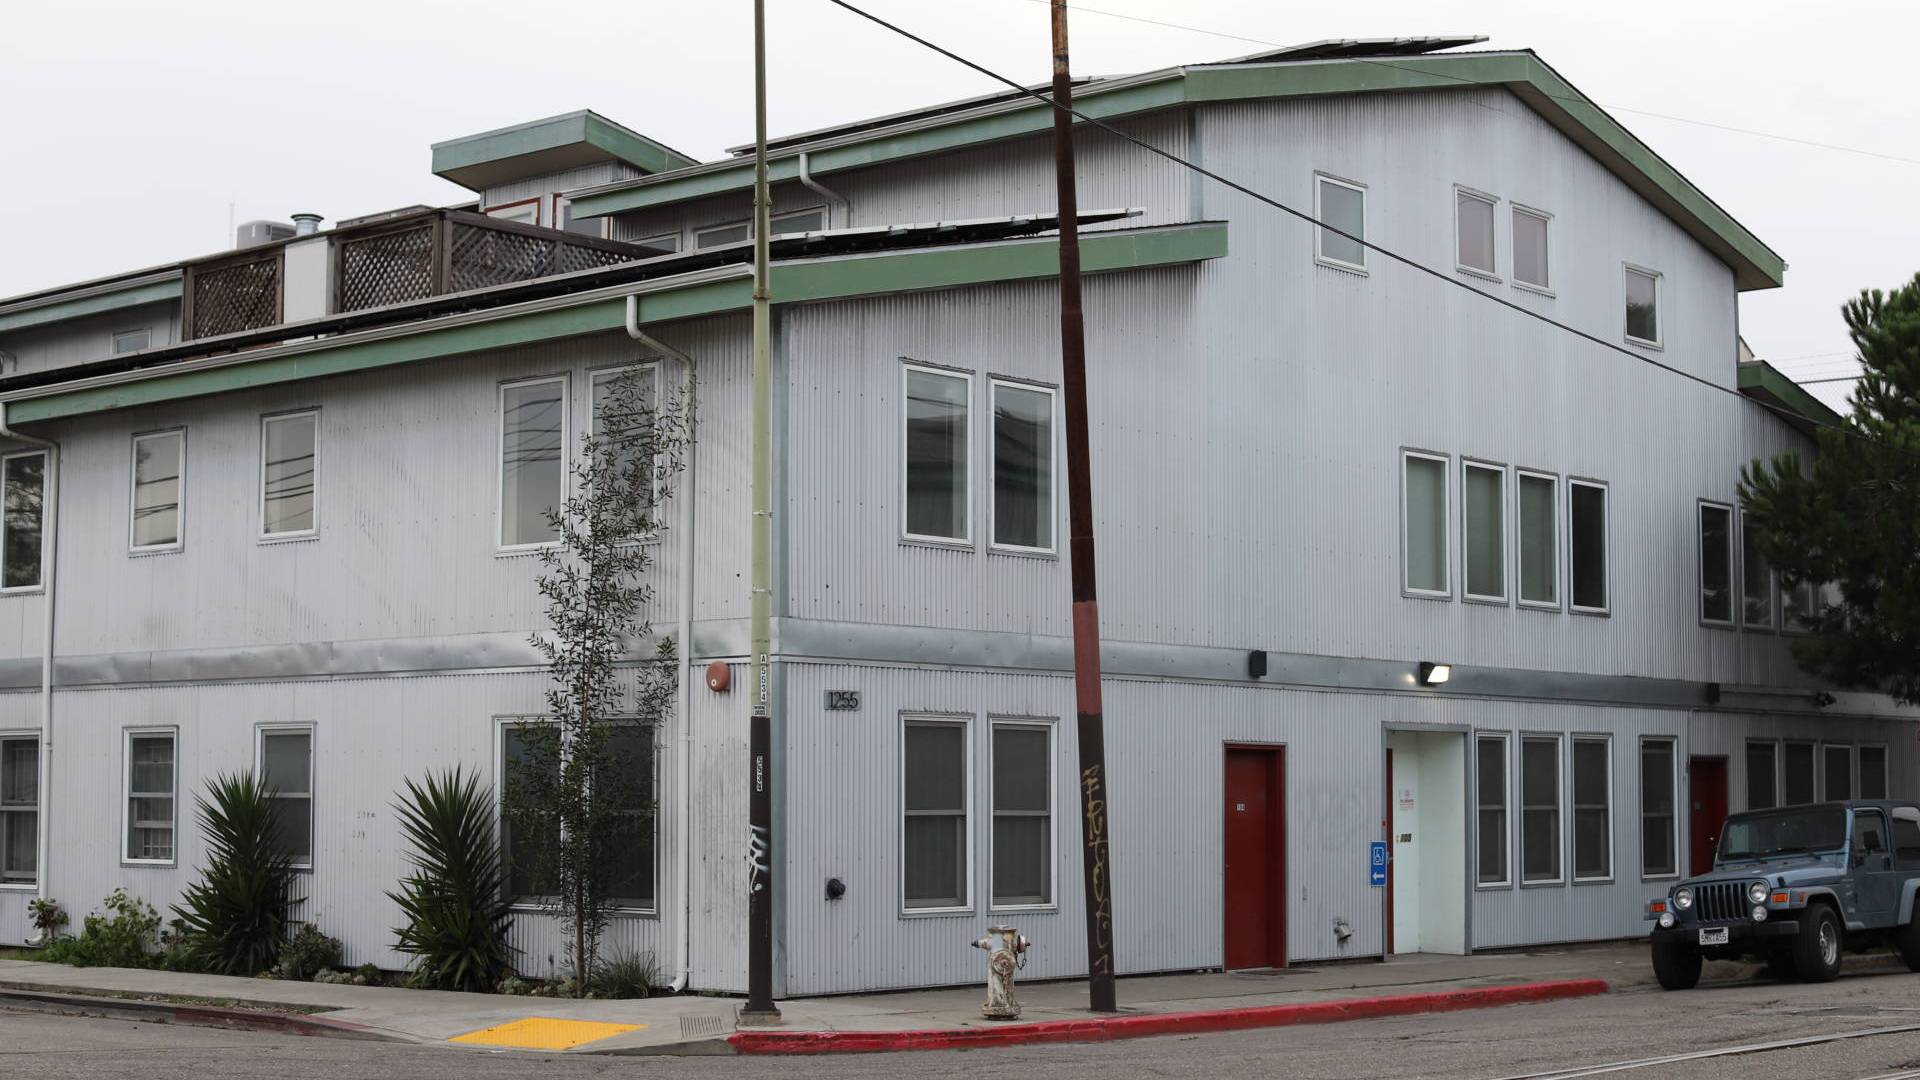 The Northern California Land Trust spent millions creating 11 live-work units and the performance and rehearsal space at what was known as the Noodle Factory.